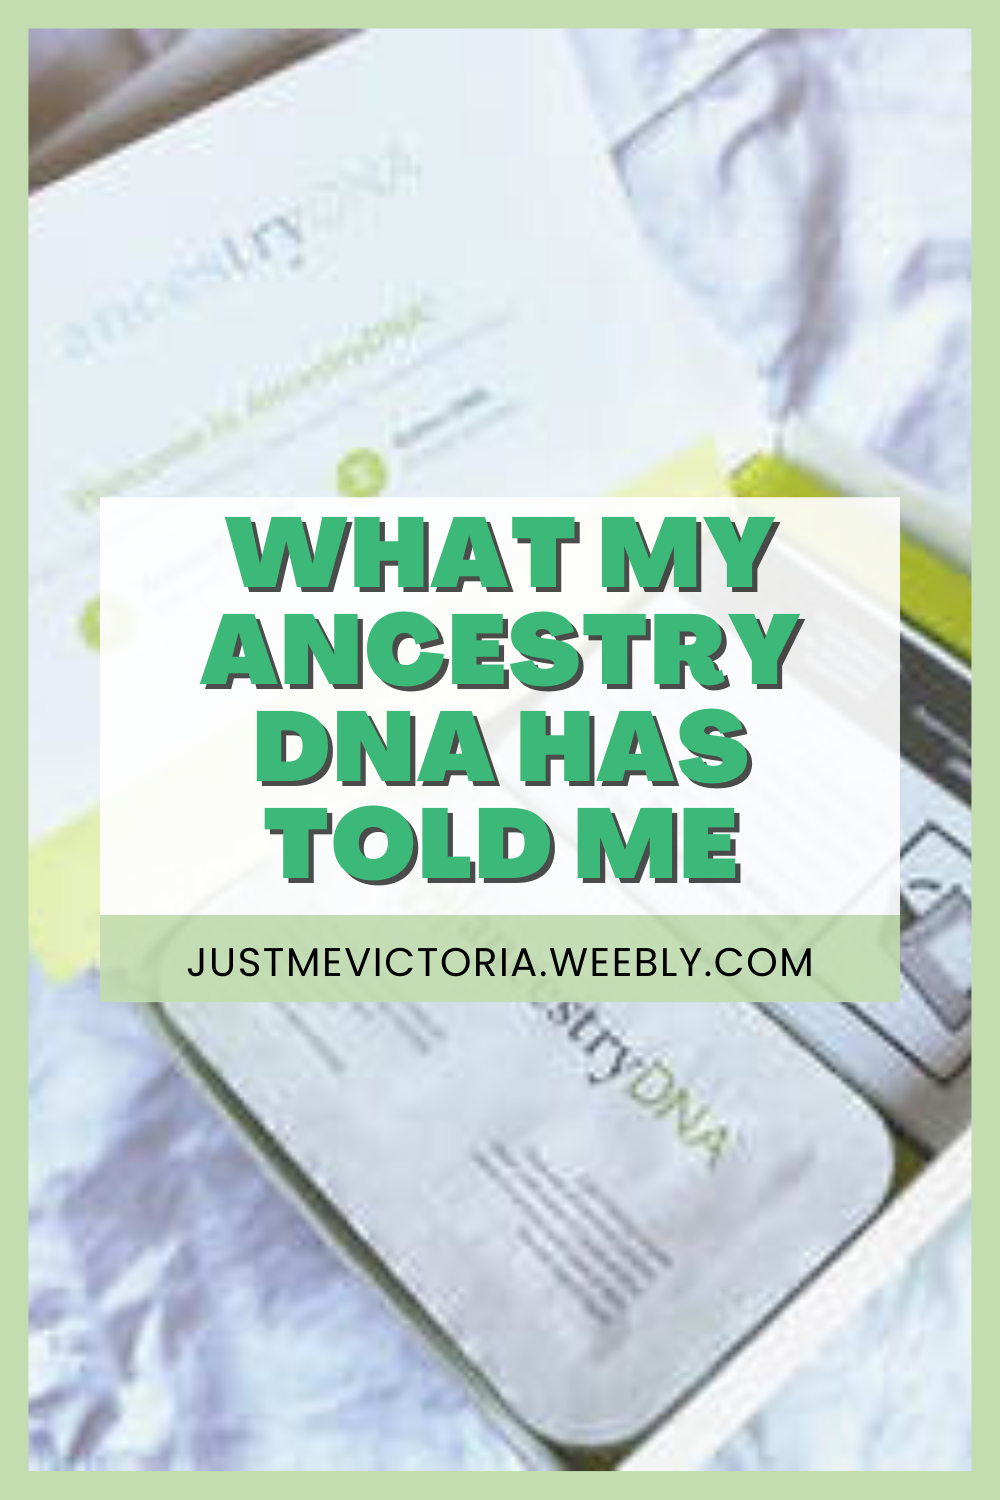 What My AncestryDNA Has Told Me